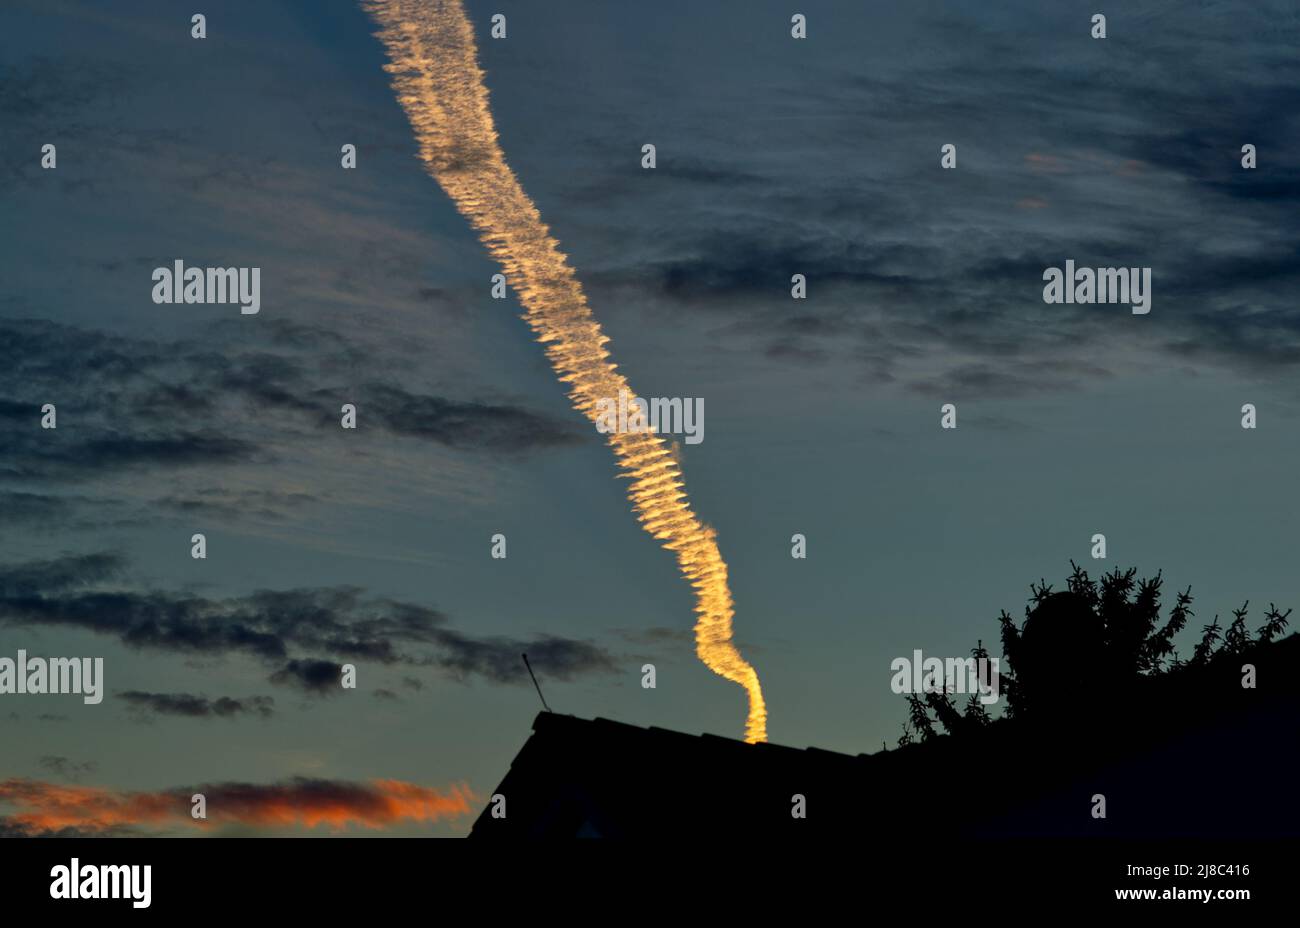 single appealing and luminous condensation trail in bright light orange color above silhouettes of roofs in the dark blue evening sky (red cloud) Stock Photo